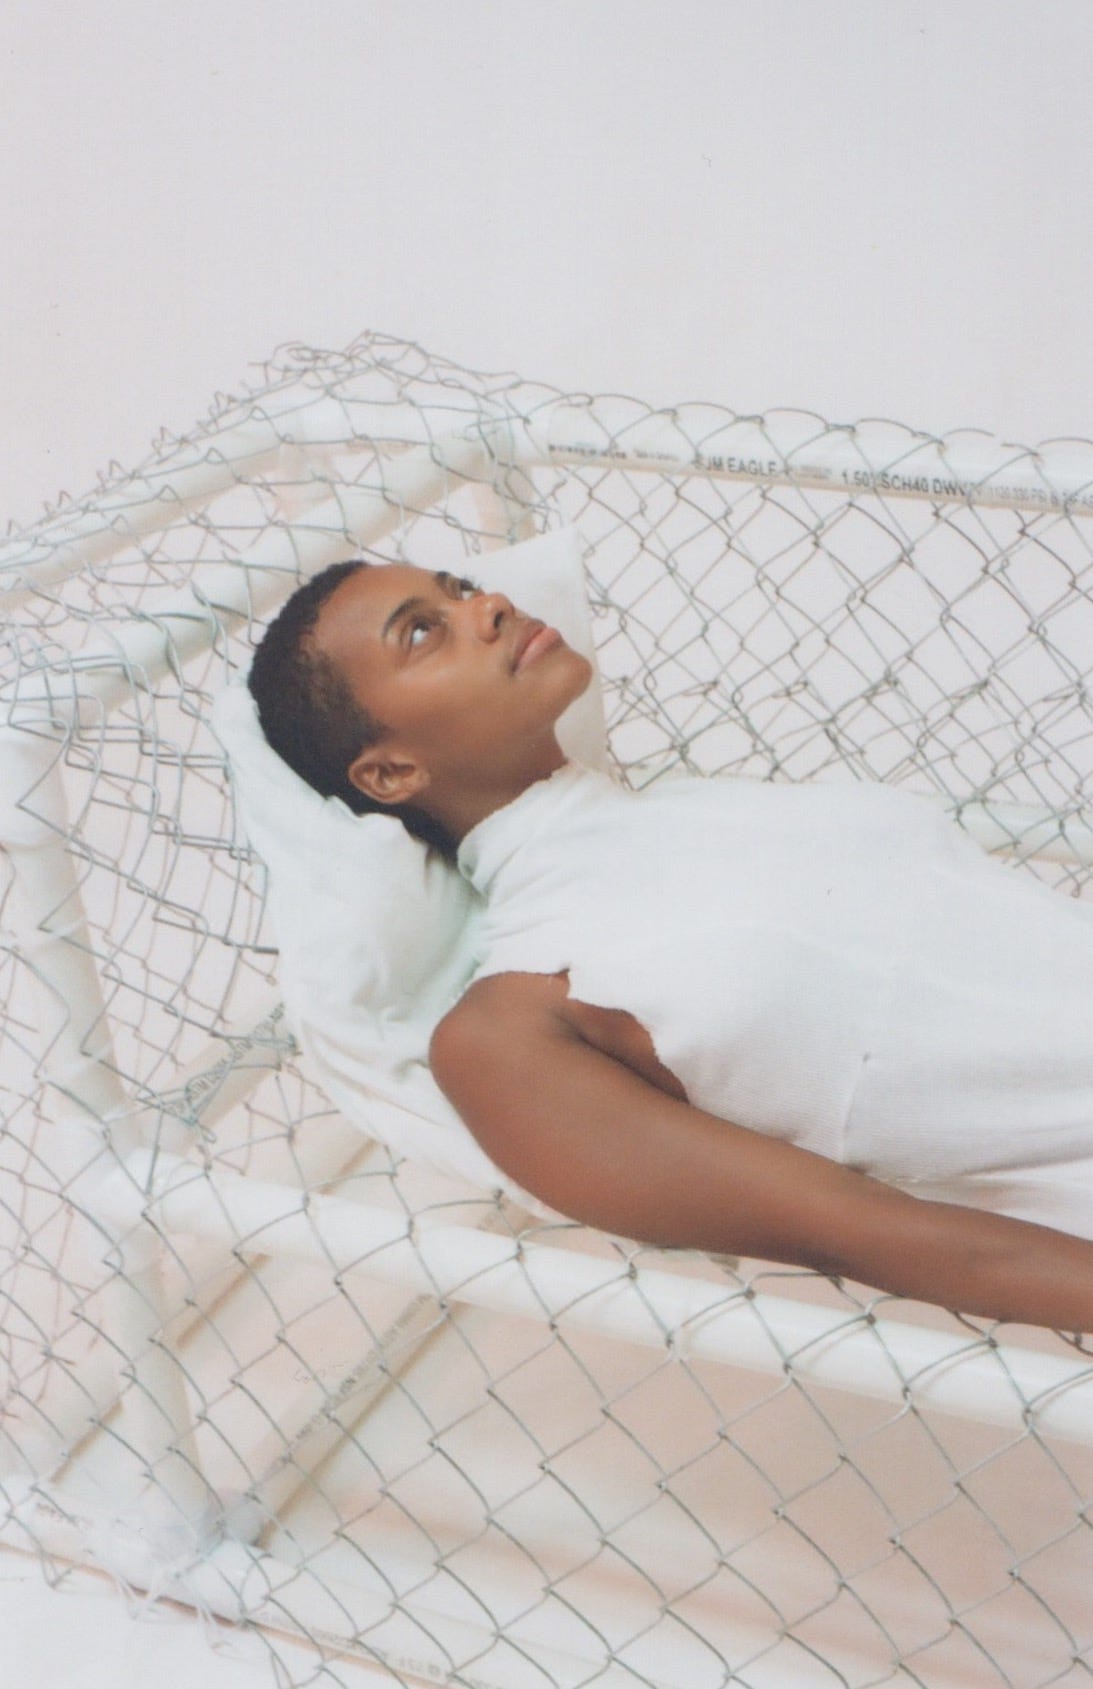 A black woman laying on a couch made of chain link fencing wearing a white bodysuit.